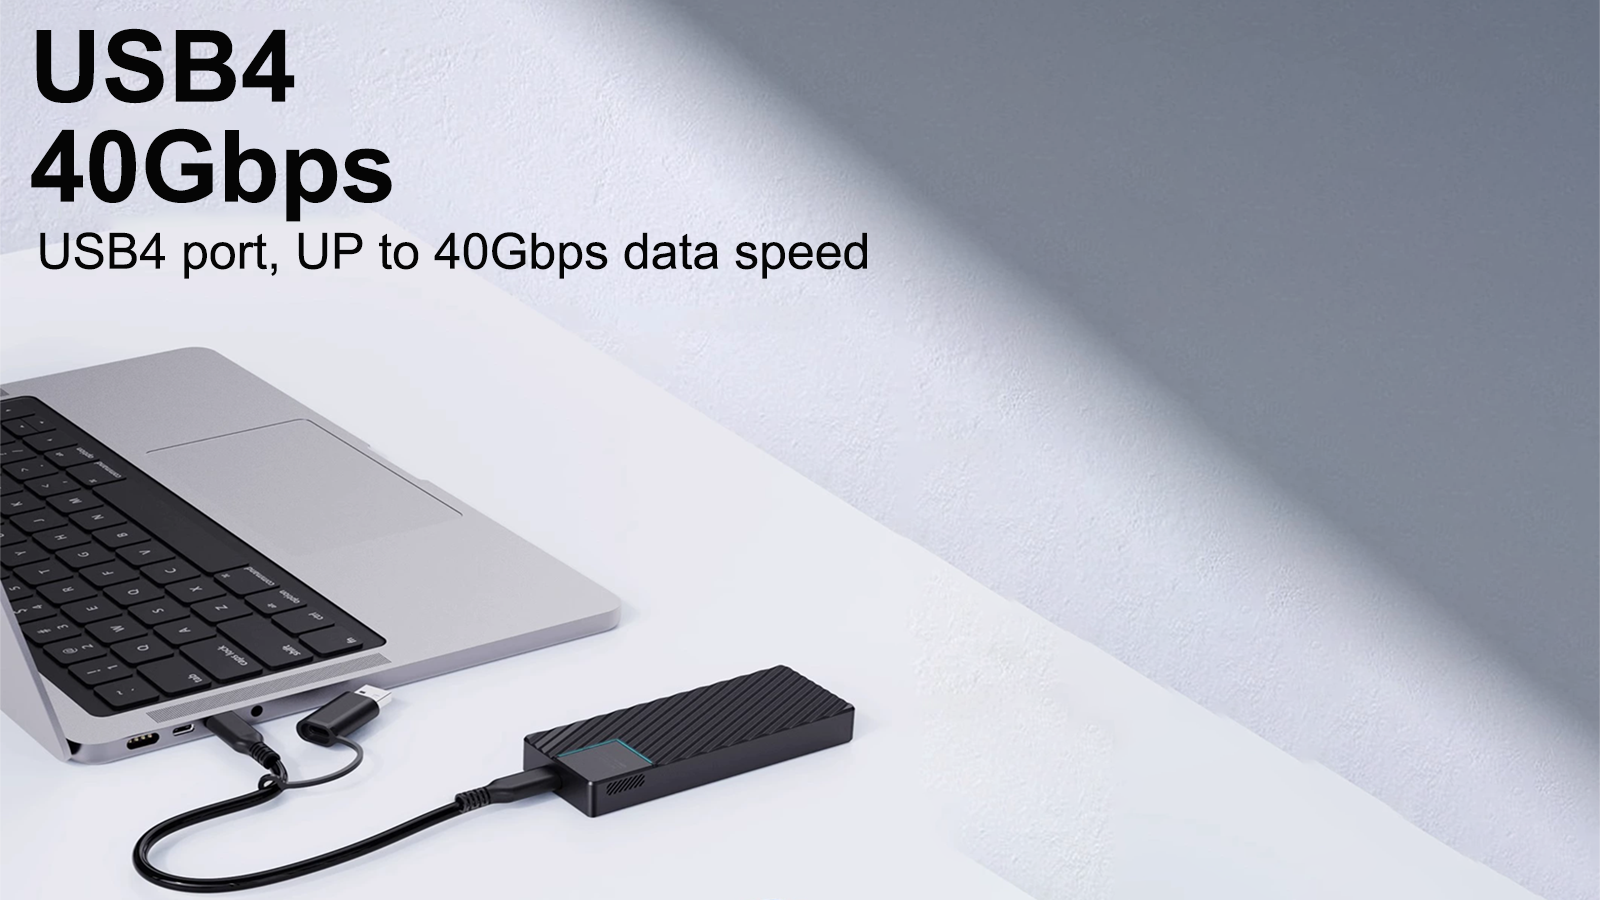 A large marketing image providing additional information about the product Volans Aluminium NVMe PCIe M.2 SSD to USB4 Type C Enclosure 40Gbps - Additional alt info not provided